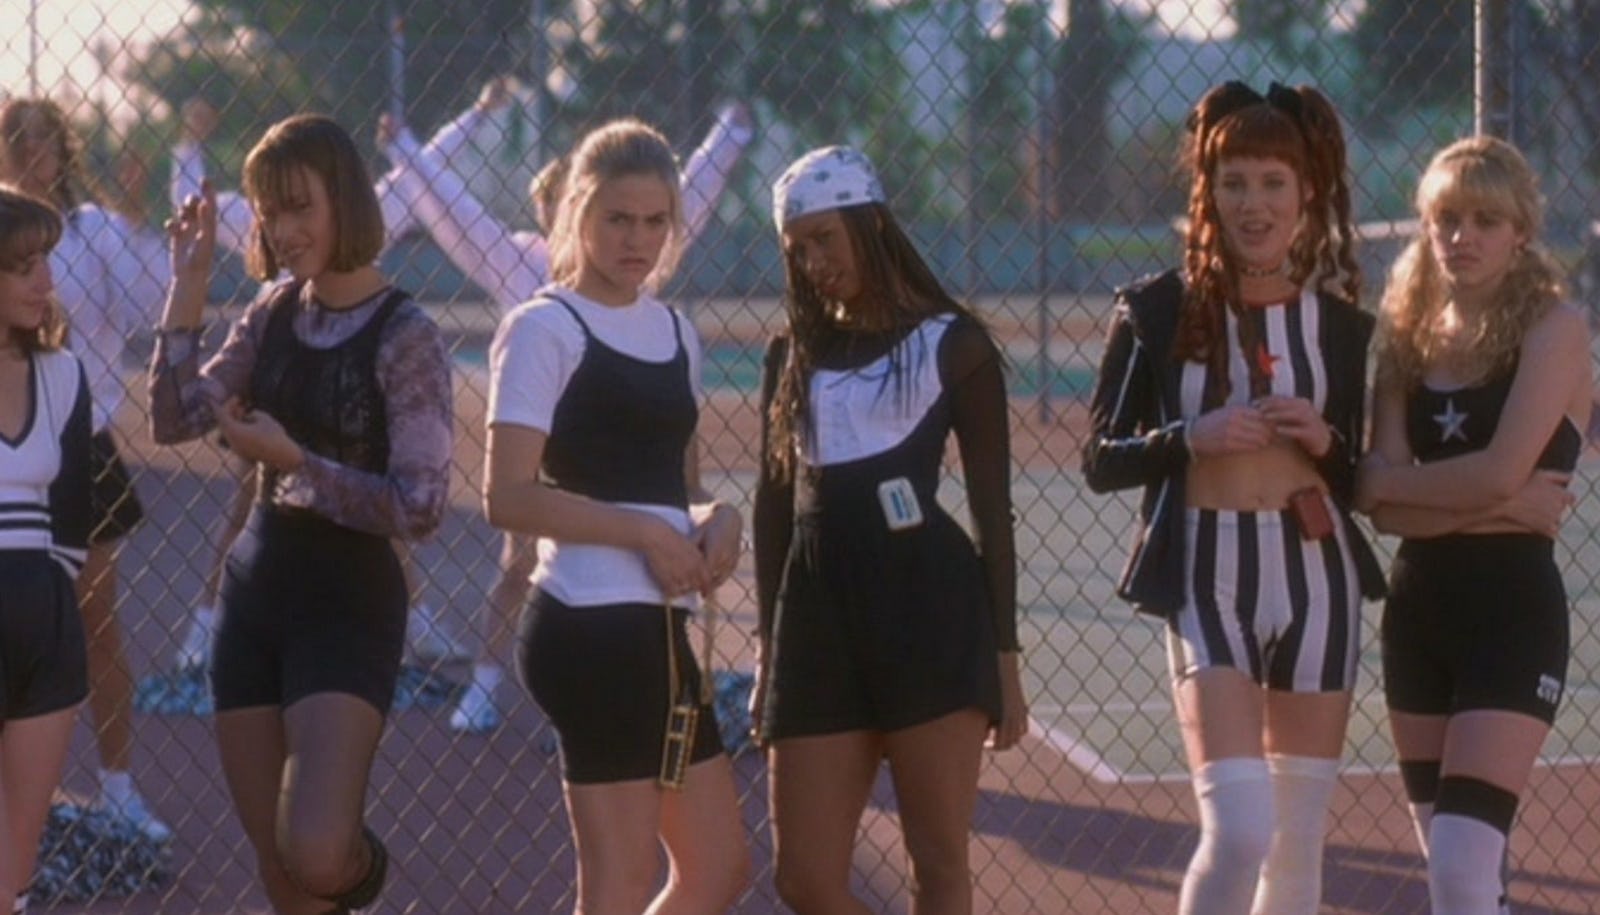 The ‘Clueless’ Musical Songs Will Be Existing Hits, So I Have A Few ...